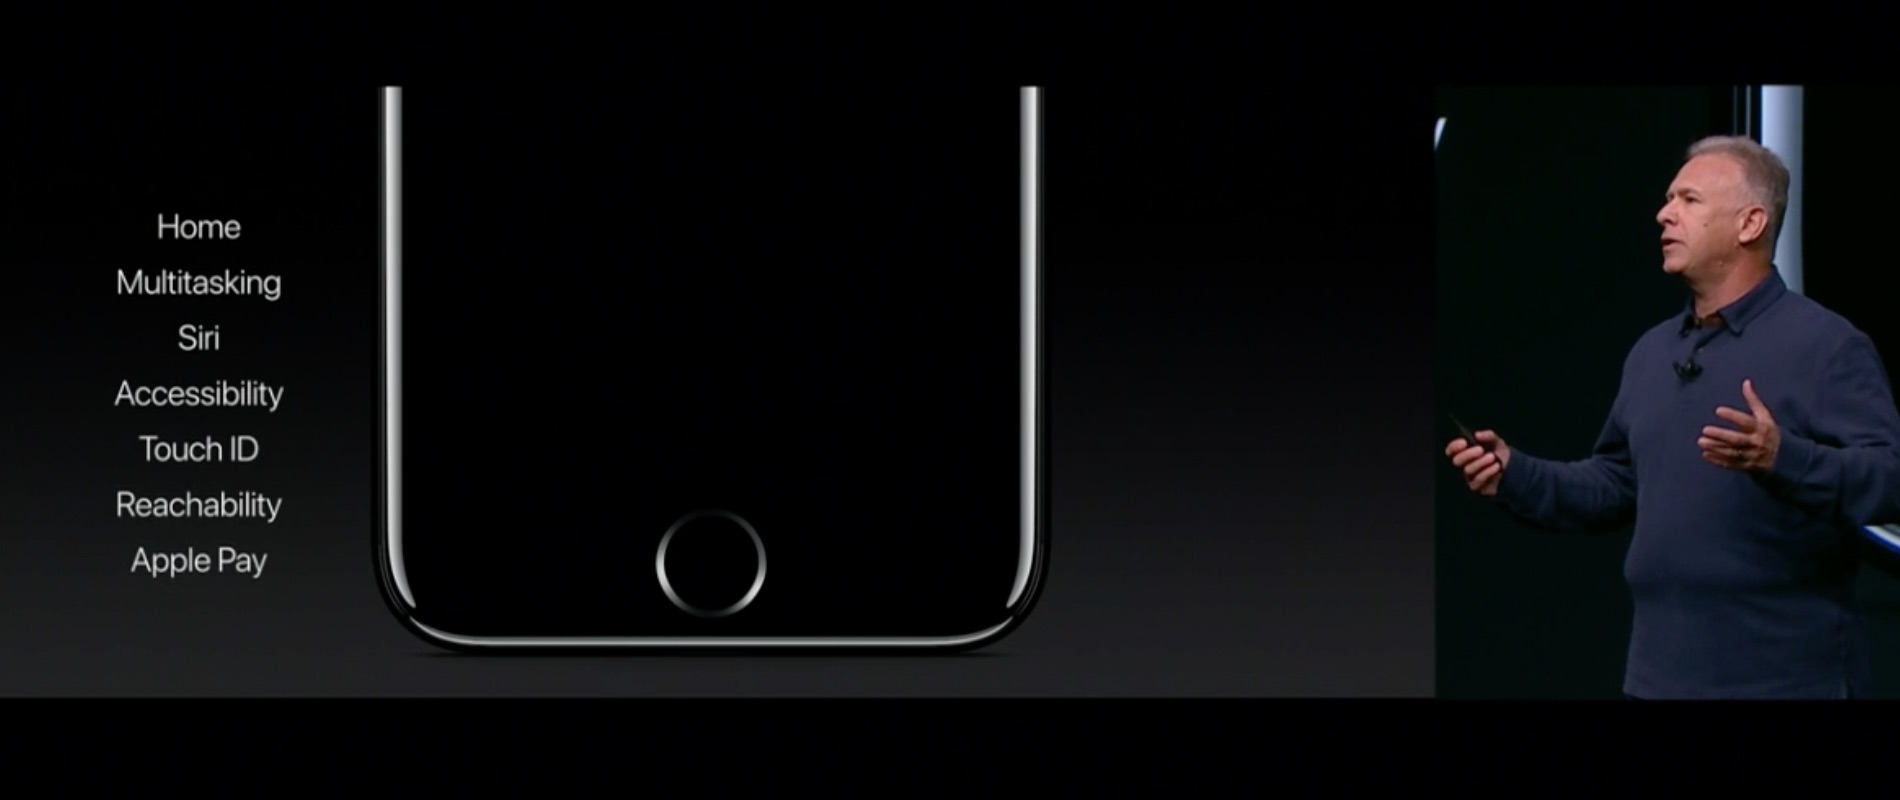 iphone7-plus-special-events-2016-sep-05